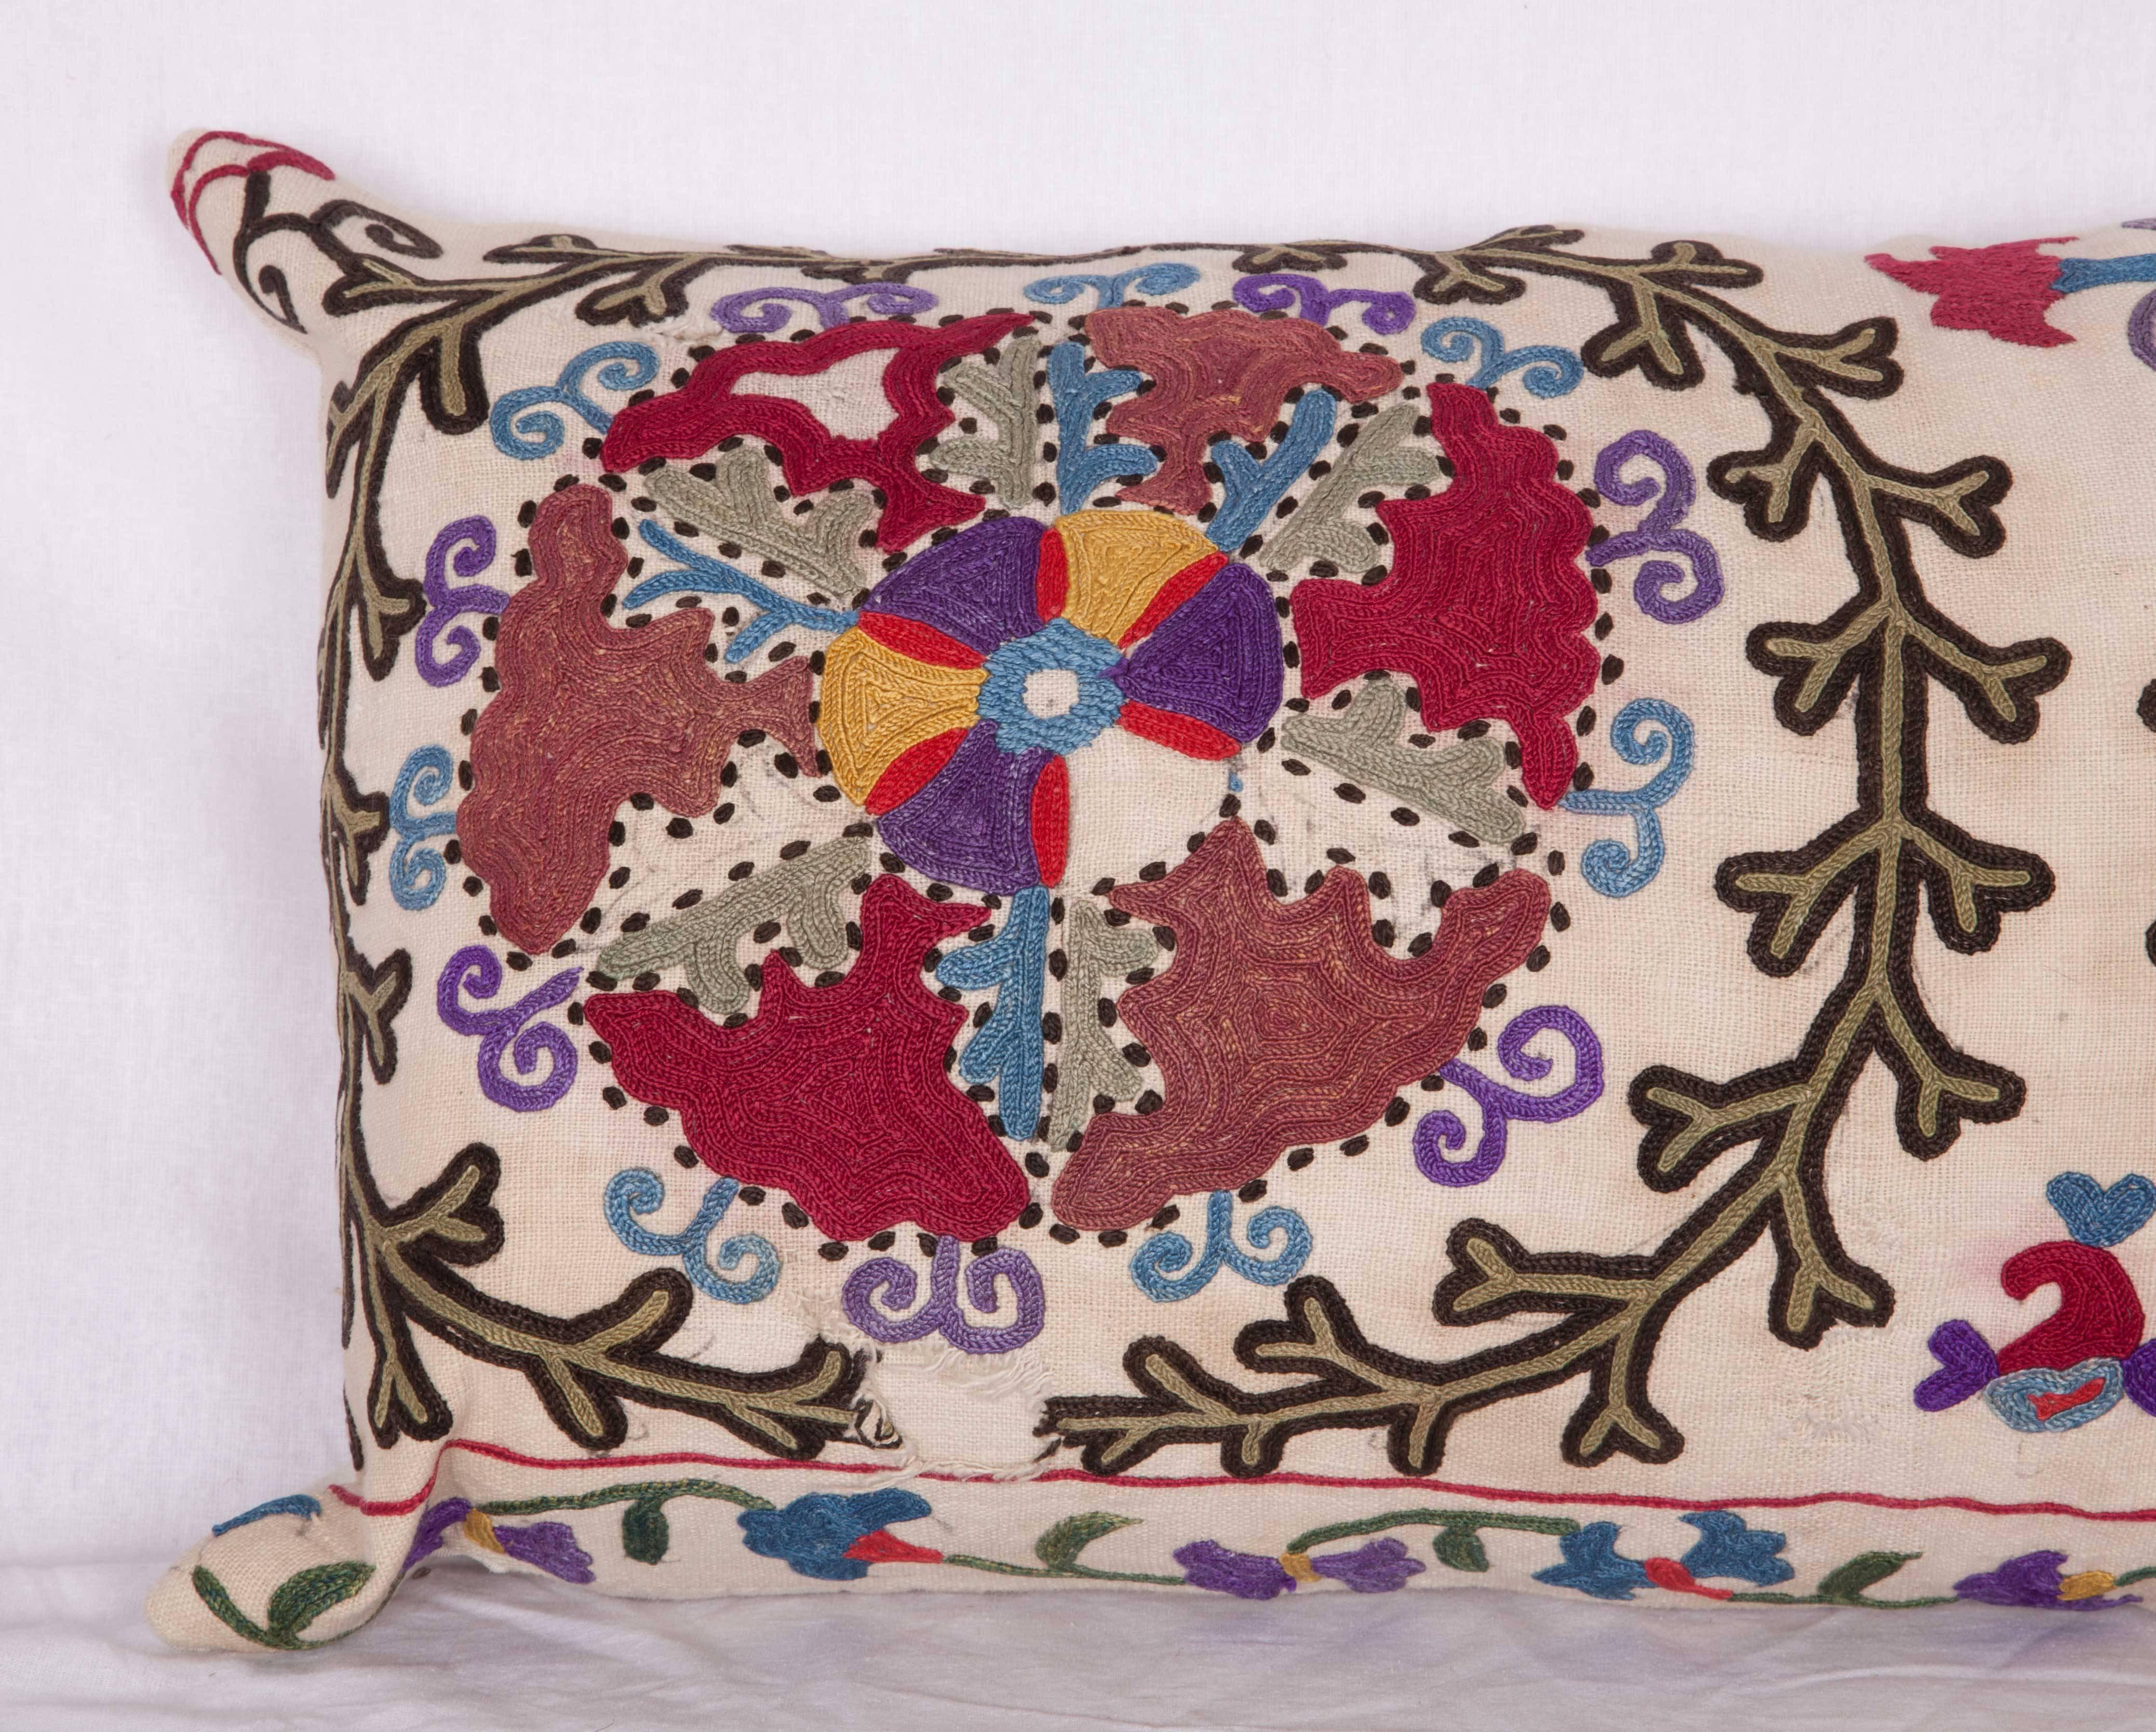 The pillow is made out of a late 19th century, Uzbek Bukhara Suzani. It does not come with an insert but it comes with a bag made to the size and out of cotton to accommodate the filling. The backing is made of linen. Please note 'filling is not